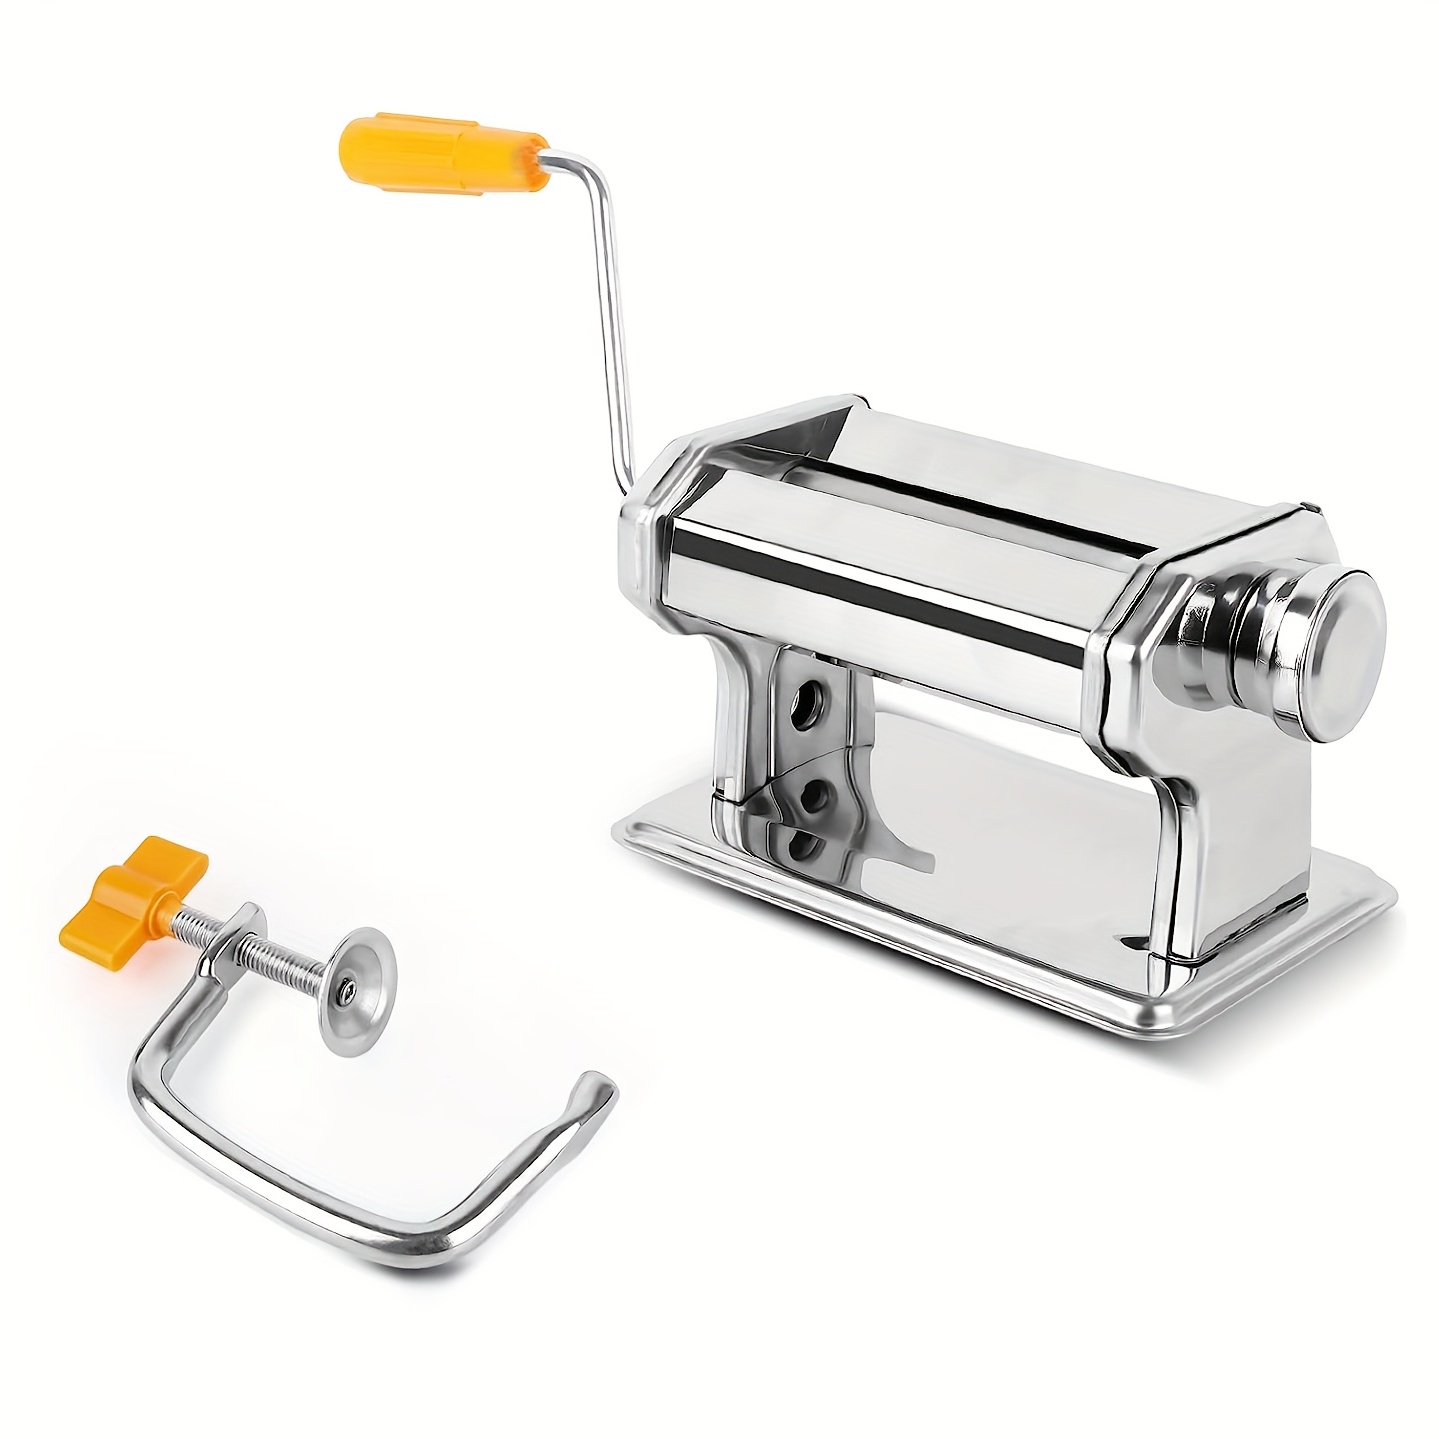 AMACO PASTA MACHINE For use with POLYMER CLAY or Soft Metal Sheets Preowned